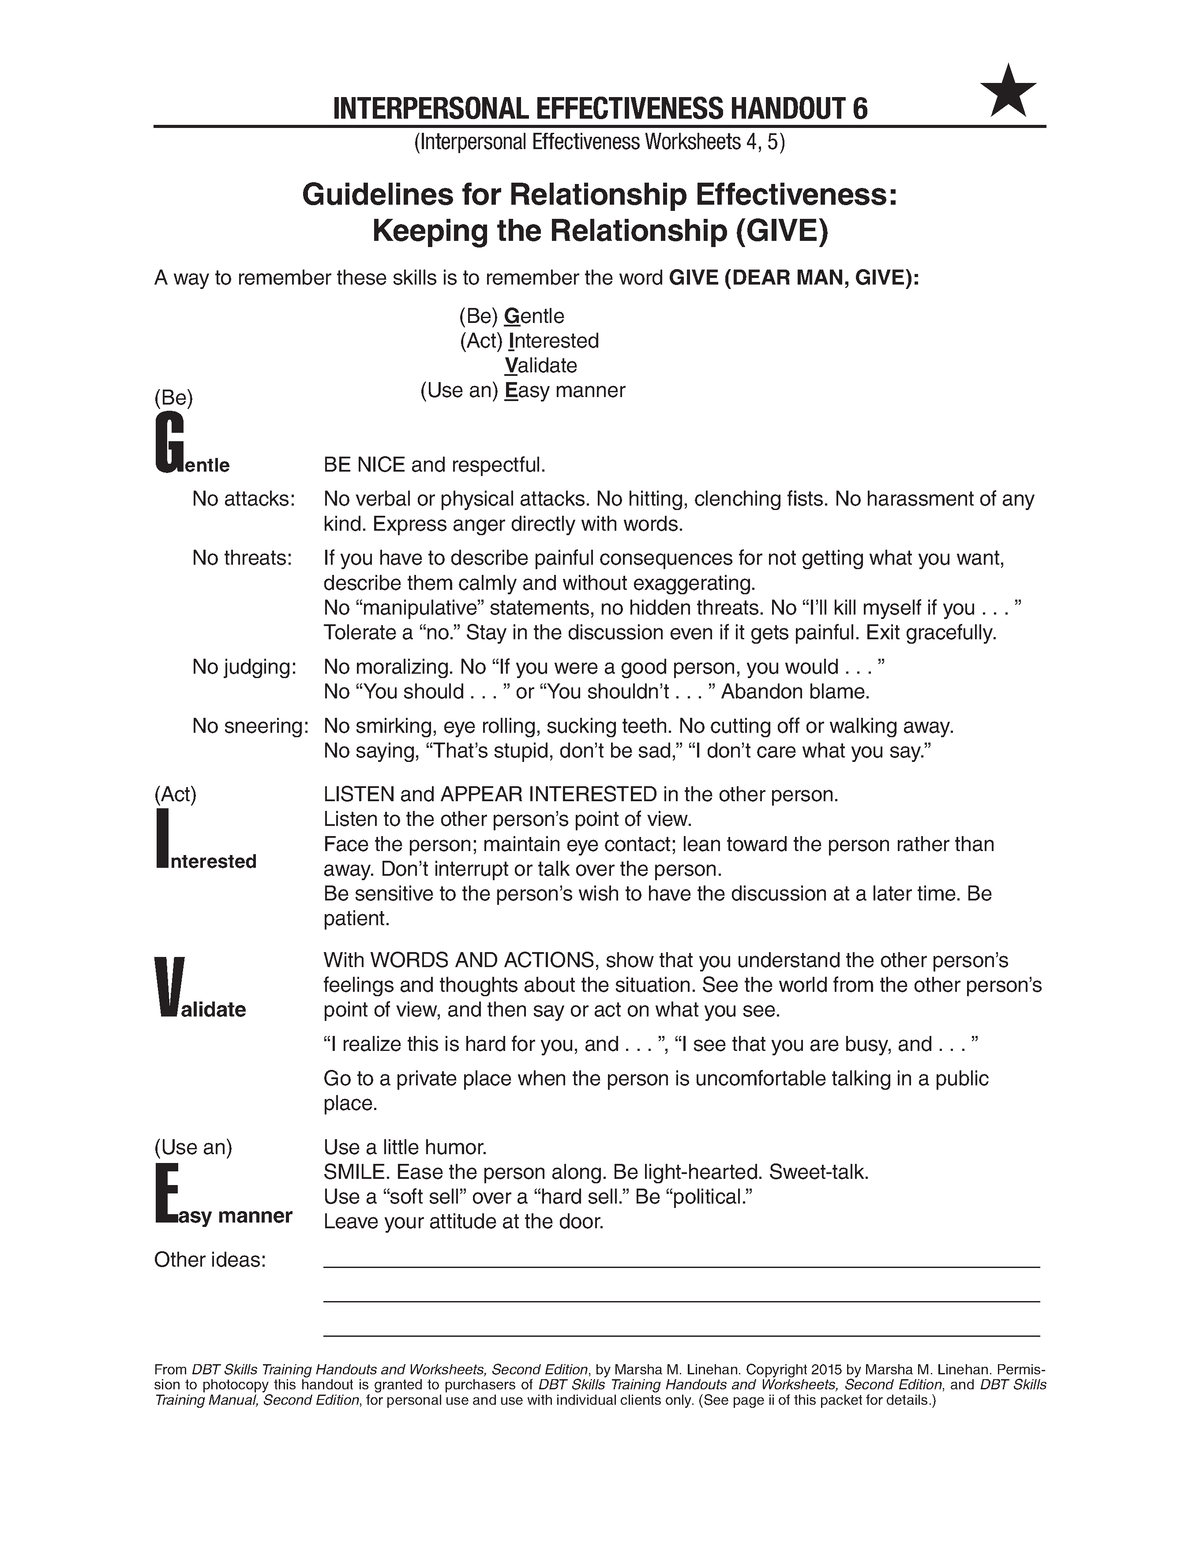 Which Dbt Worksheet Focuses On Give Skills